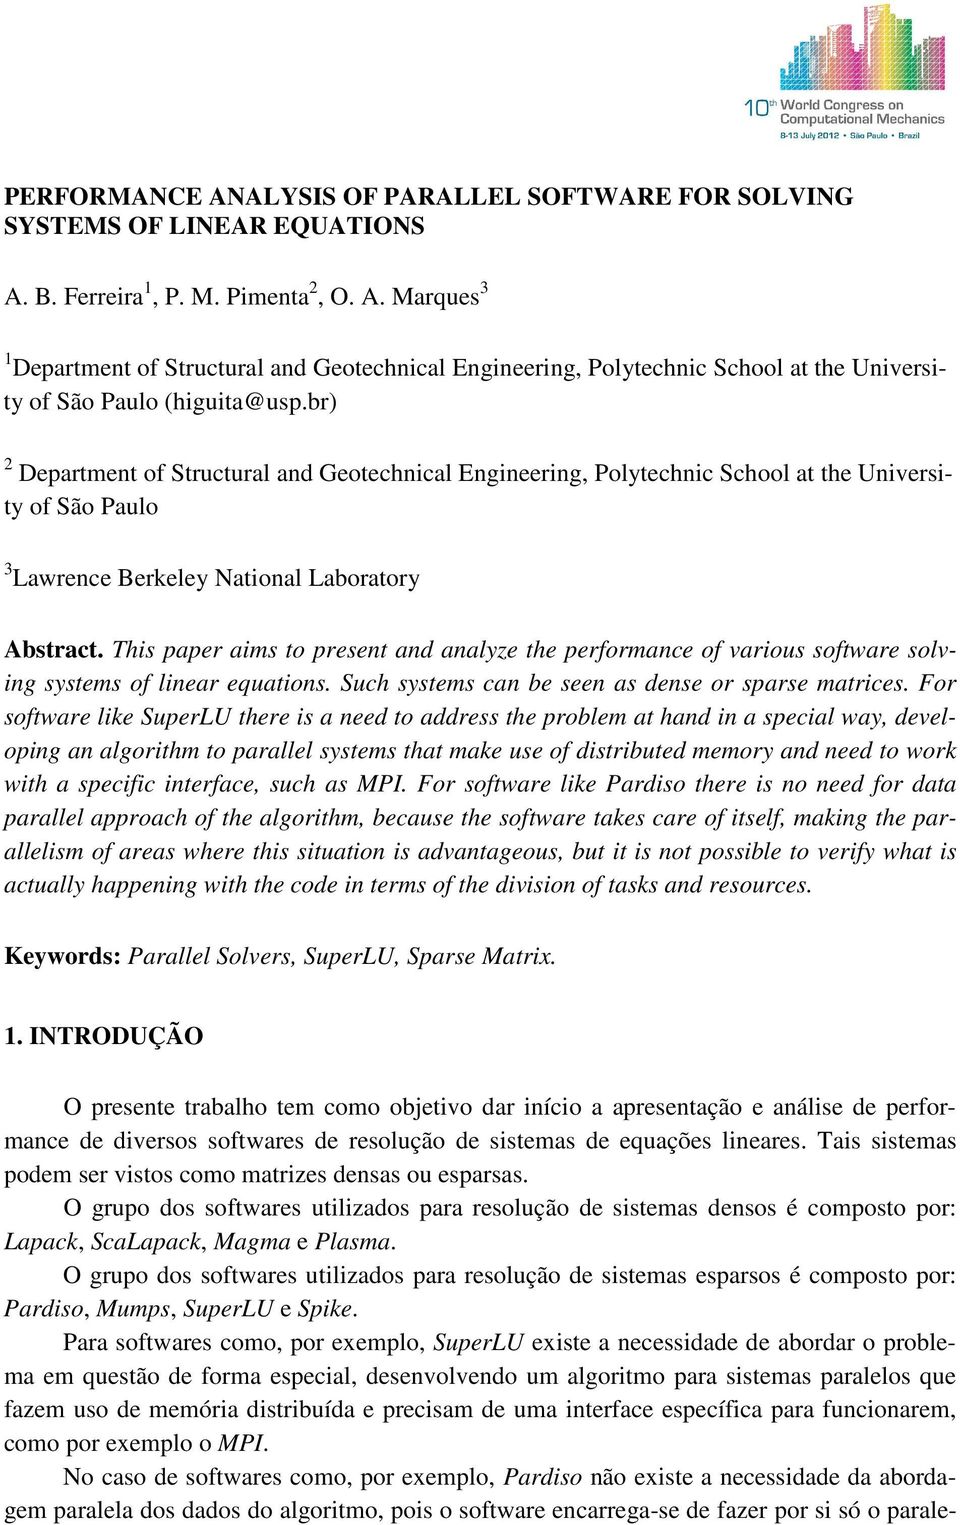 This paper aims to present and analyze the performance of various software solving systems of linear equations. Such systems can be seen as dense or sparse matrices.